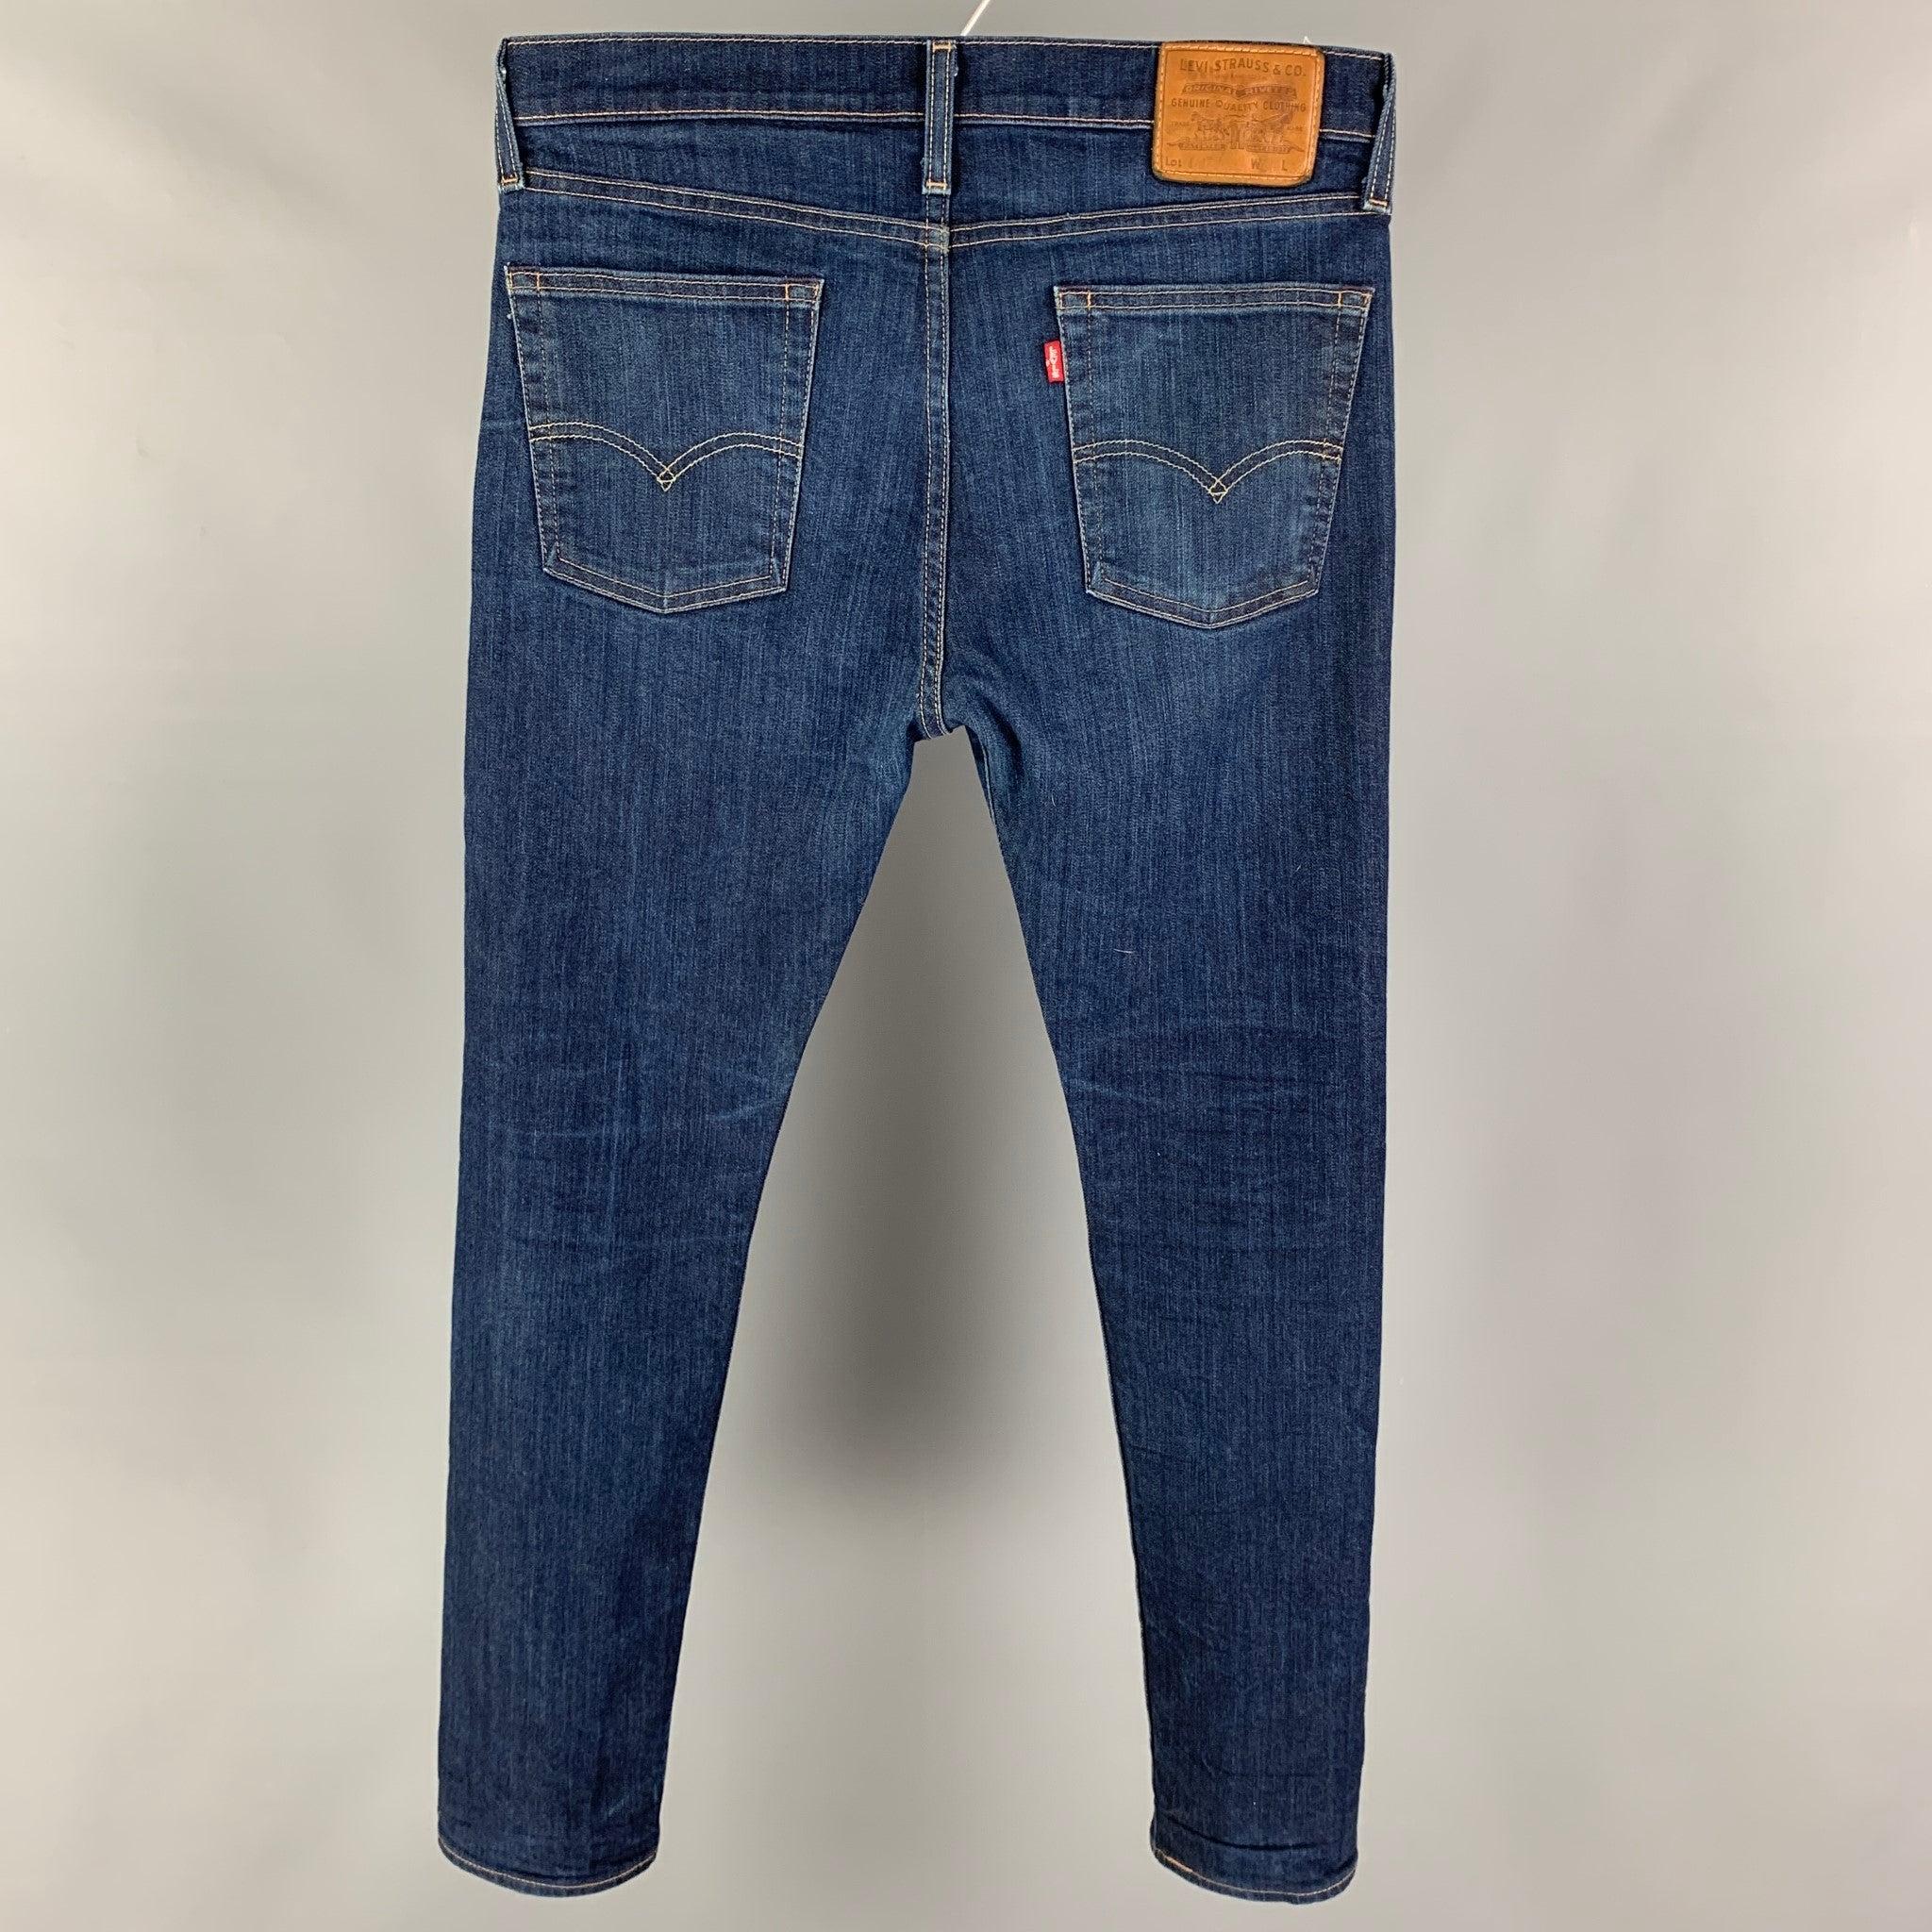 LEVI'S jeans comes in a blue washed cotton featuring a slim fit, contrast stitching, and a zip fly closure.
Very Good
Pre-Owned Condition. 

Marked:   33/32 

Measurements: 
  Waist: 34 inches Rise: 10 inches Inseam: 30 inches Leg Opening: 12 inches